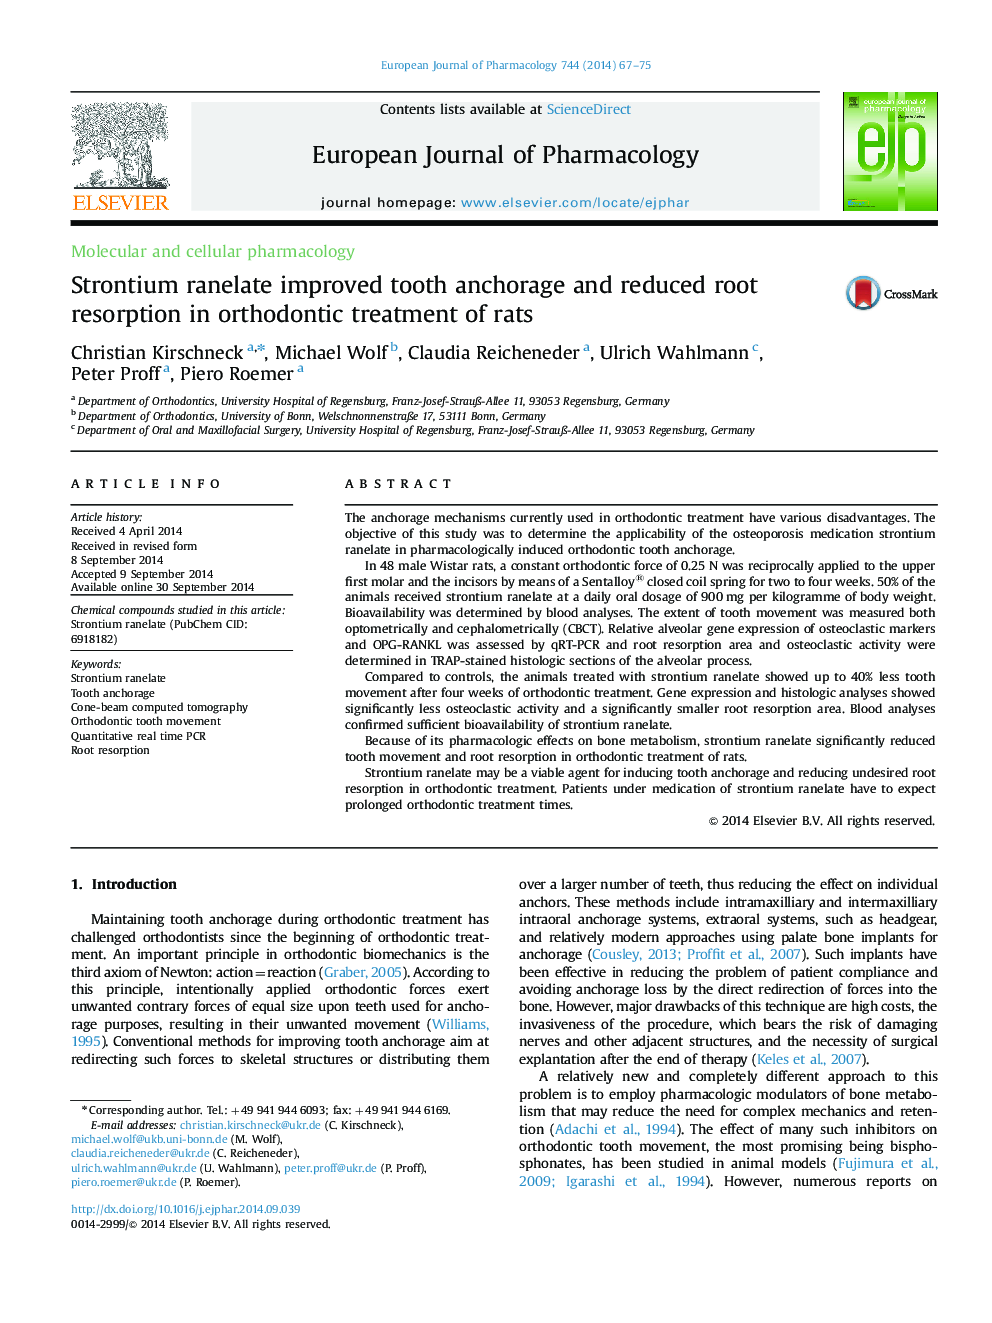 Molecular and cellular pharmacologyStrontium ranelate improved tooth anchorage and reduced root resorption in orthodontic treatment of rats